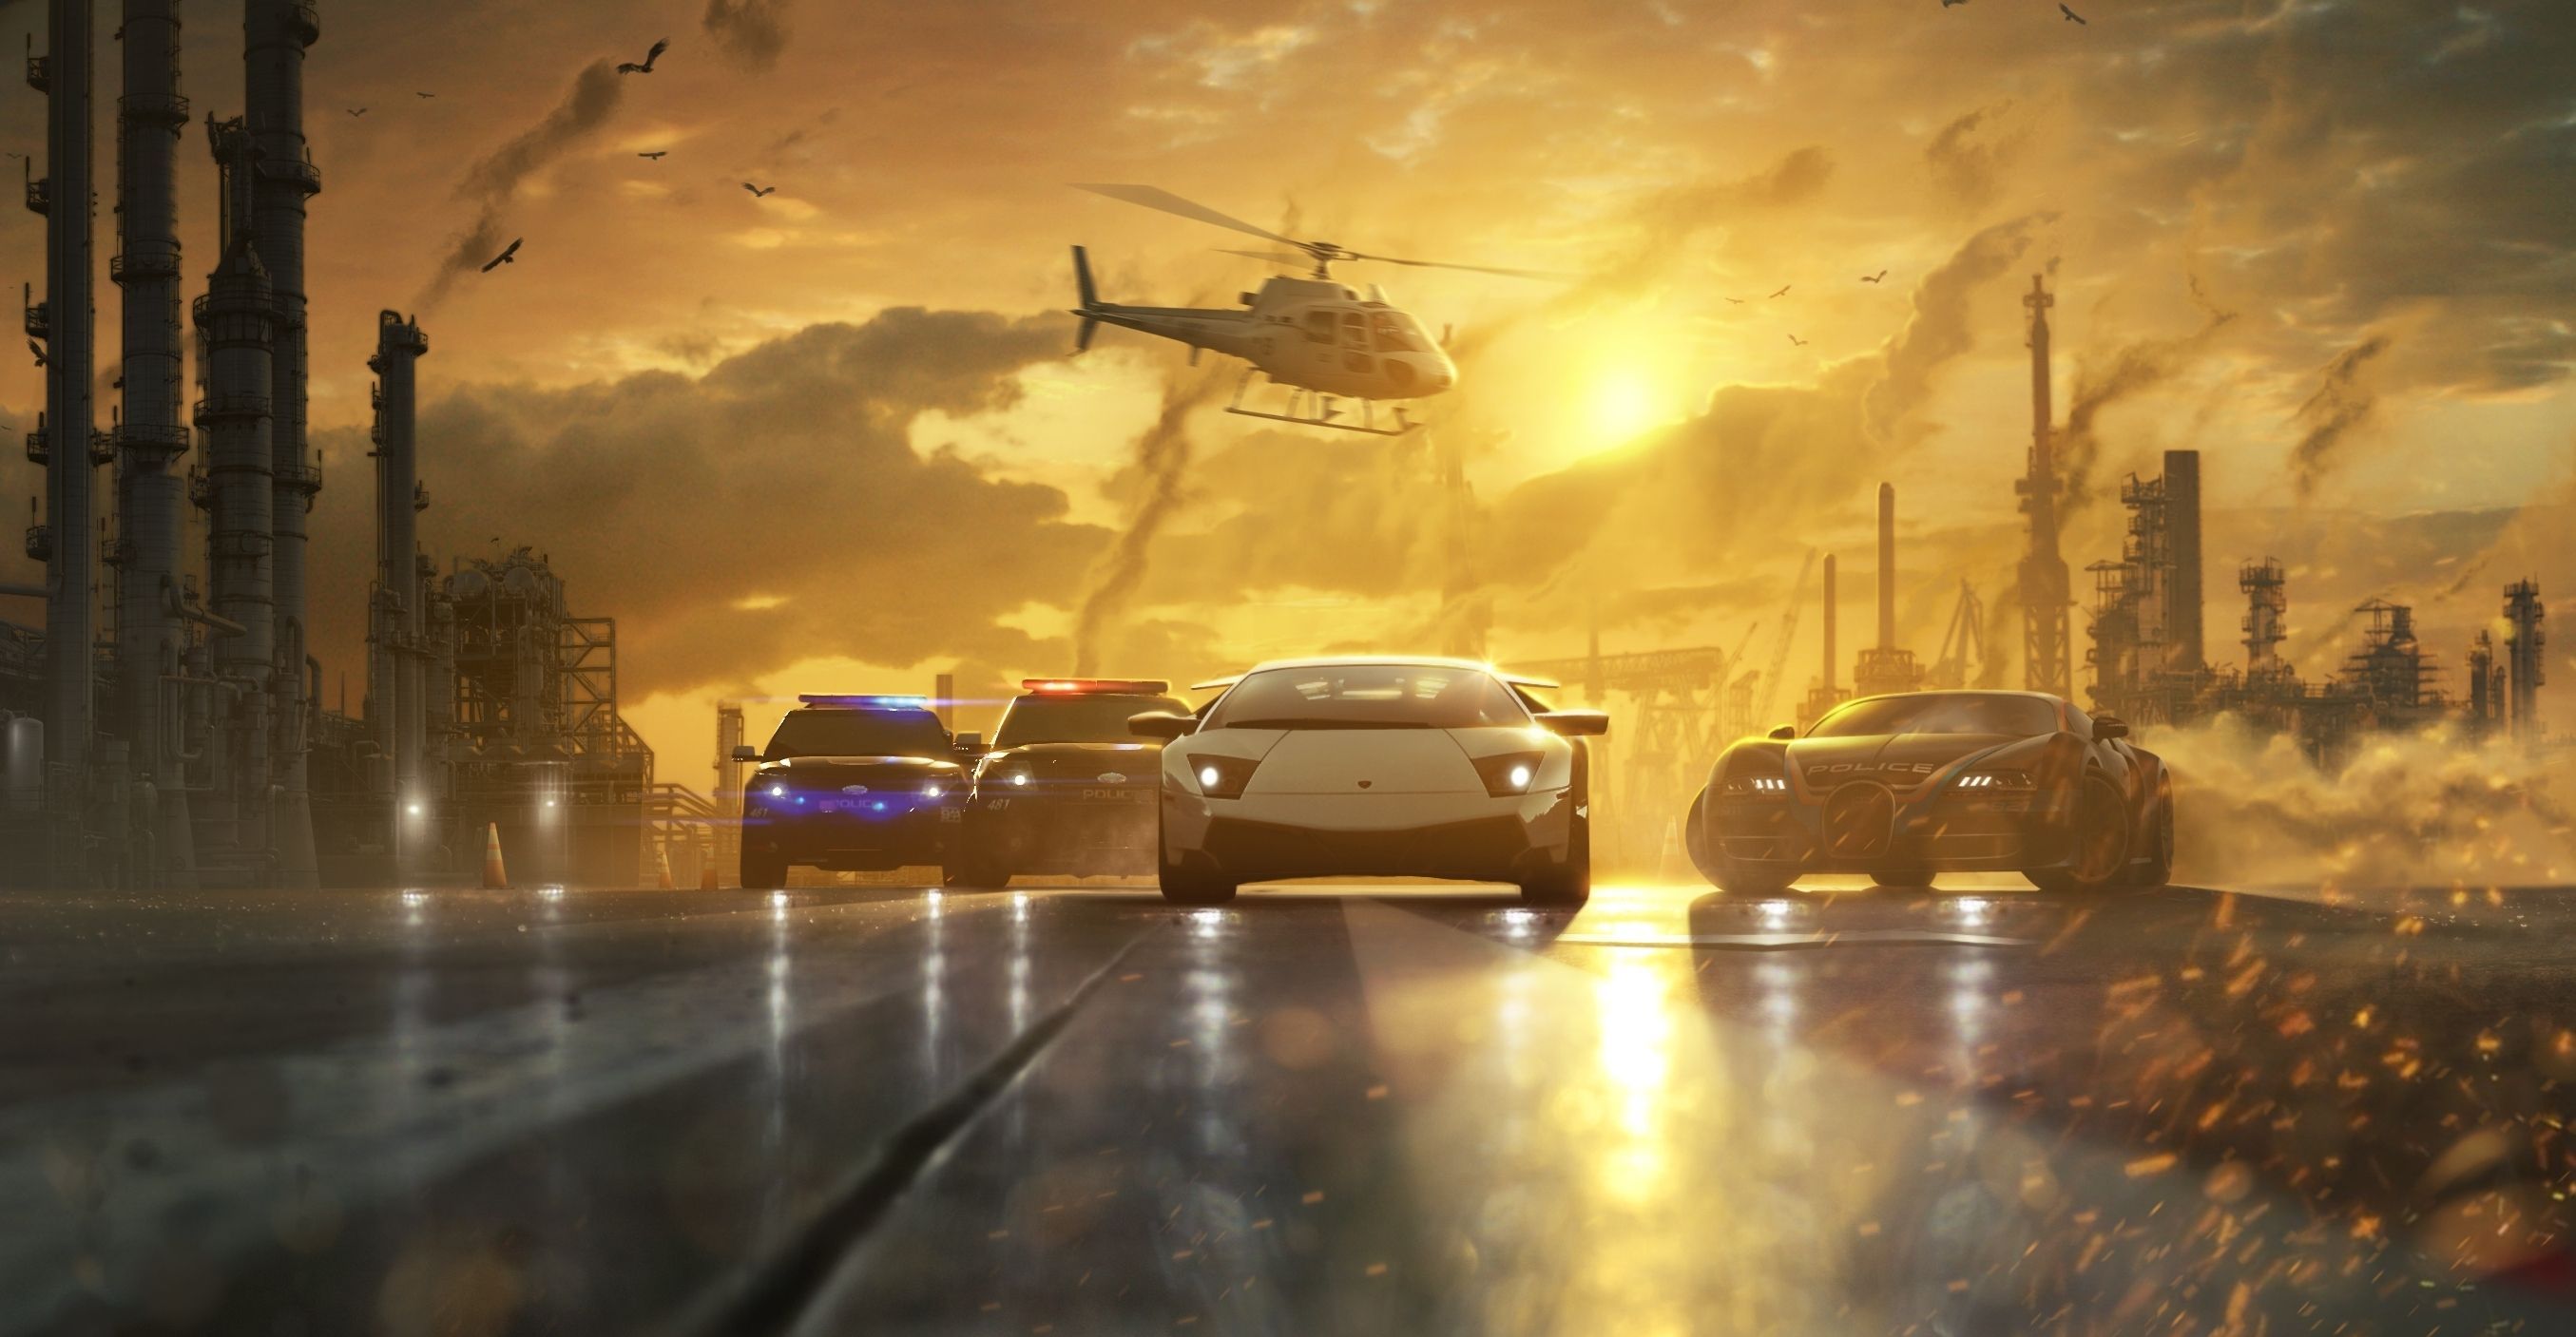 Art, machinery, race, Chase, police, road, helicopter, sunset